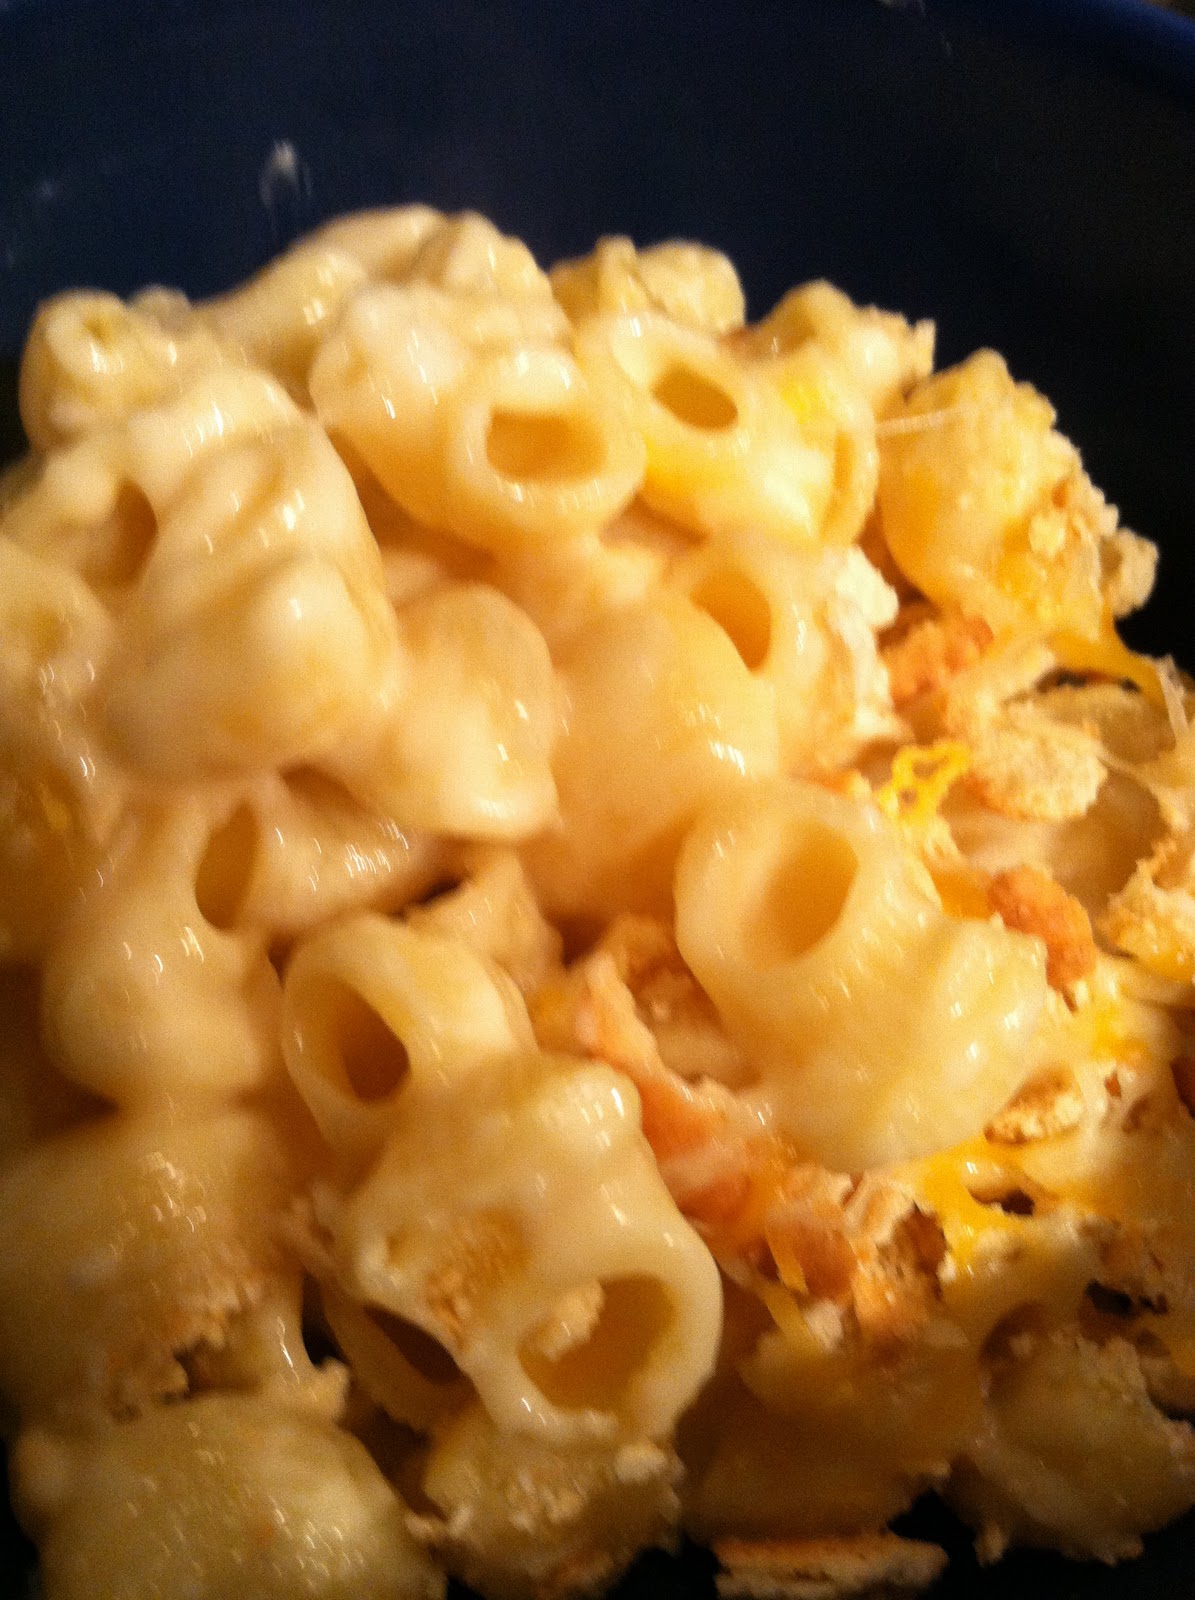 low fat baked macaroni and cheese recipe